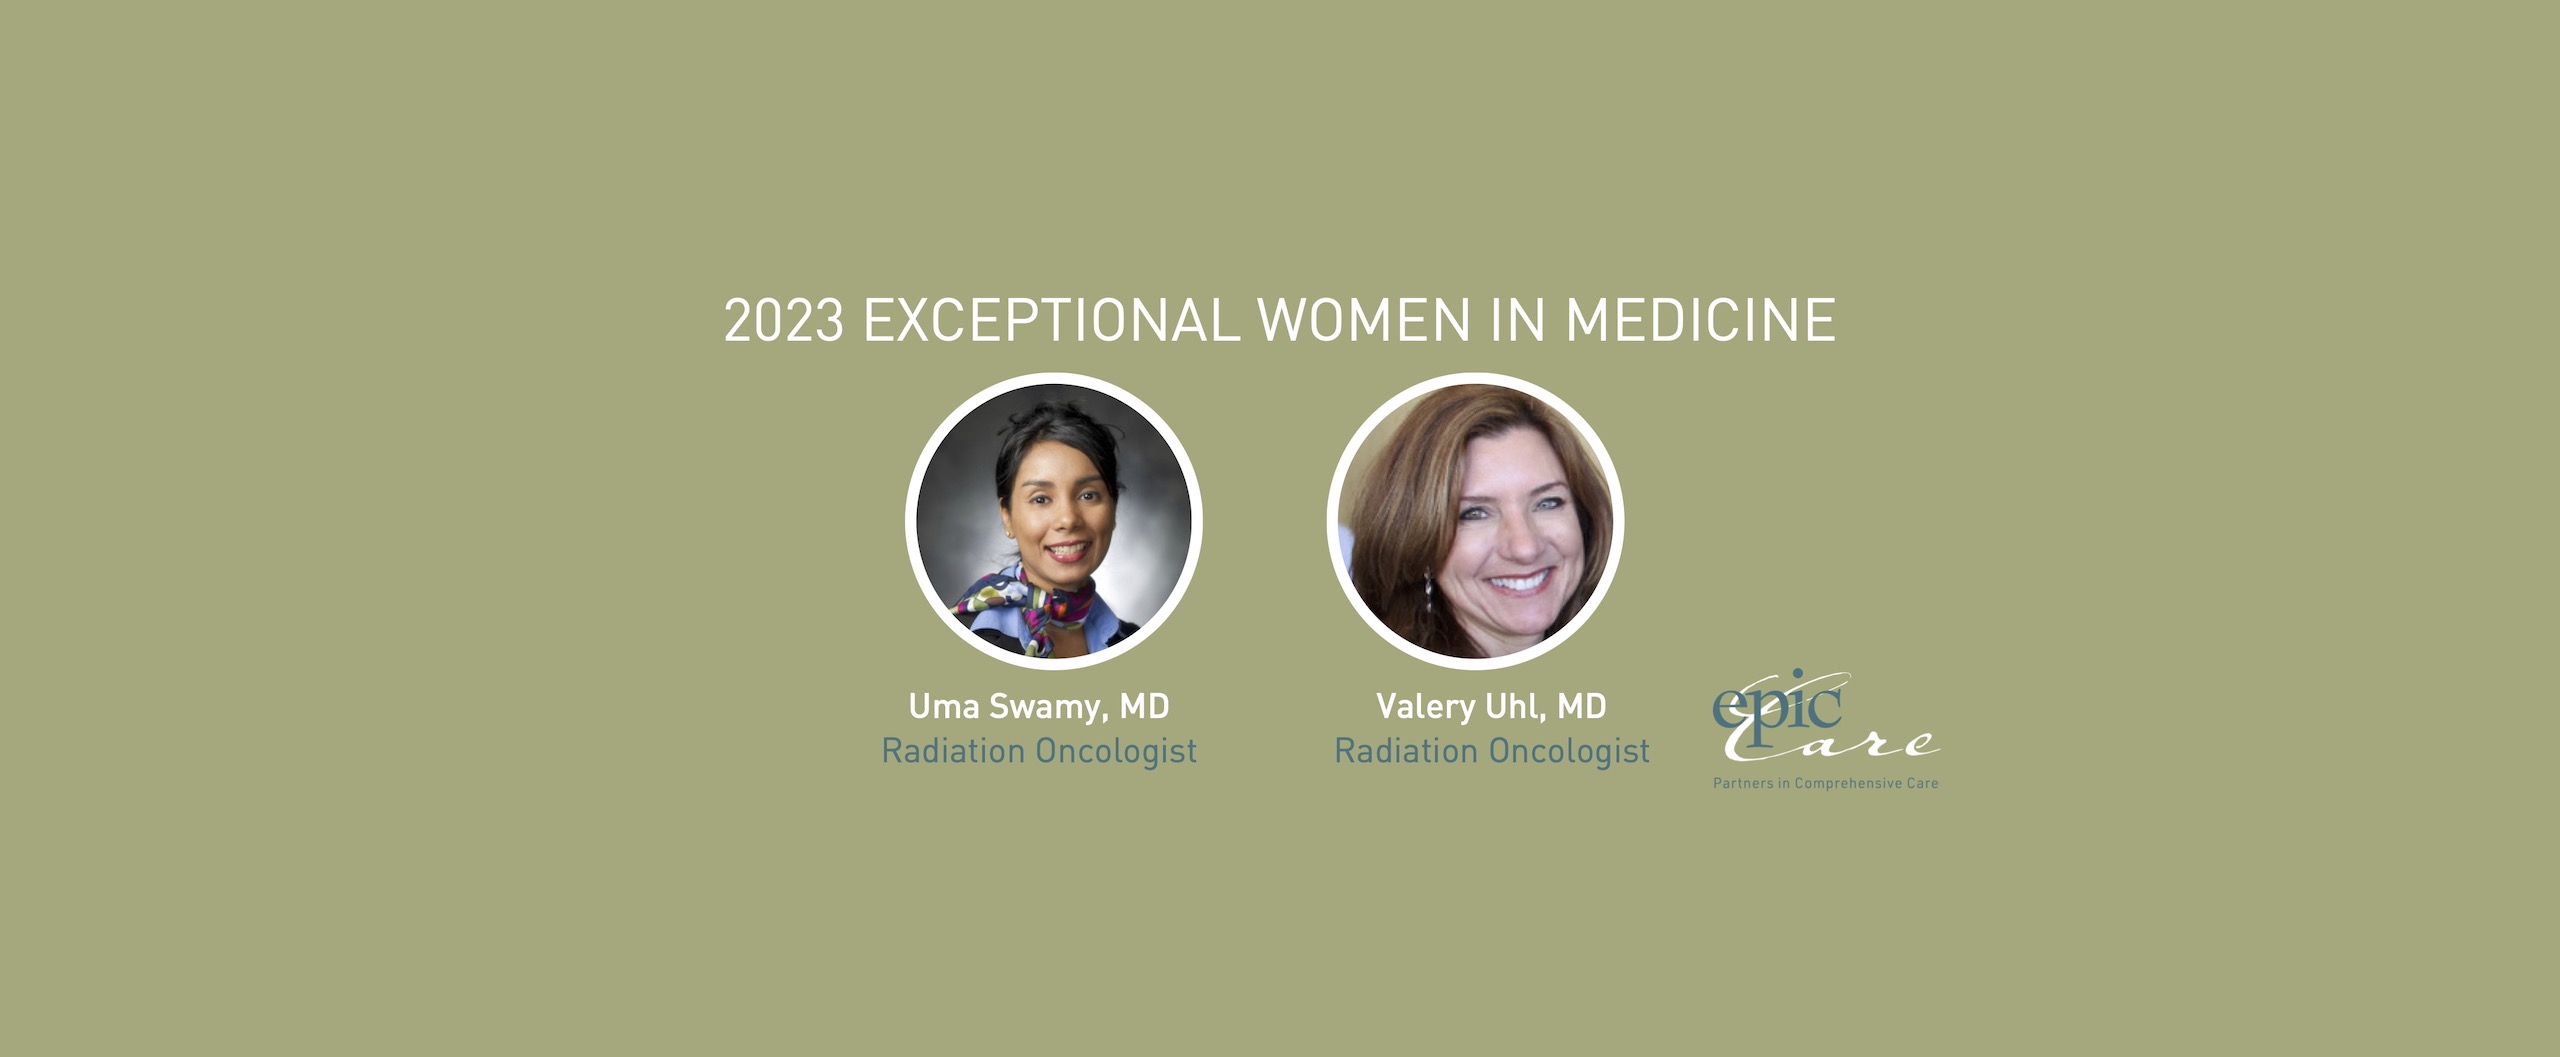 Epic Care’s Radiation Oncologists, Drs. Uma Swamy and Valery Uhl, Named Exceptional Women in Medicine for 2023!